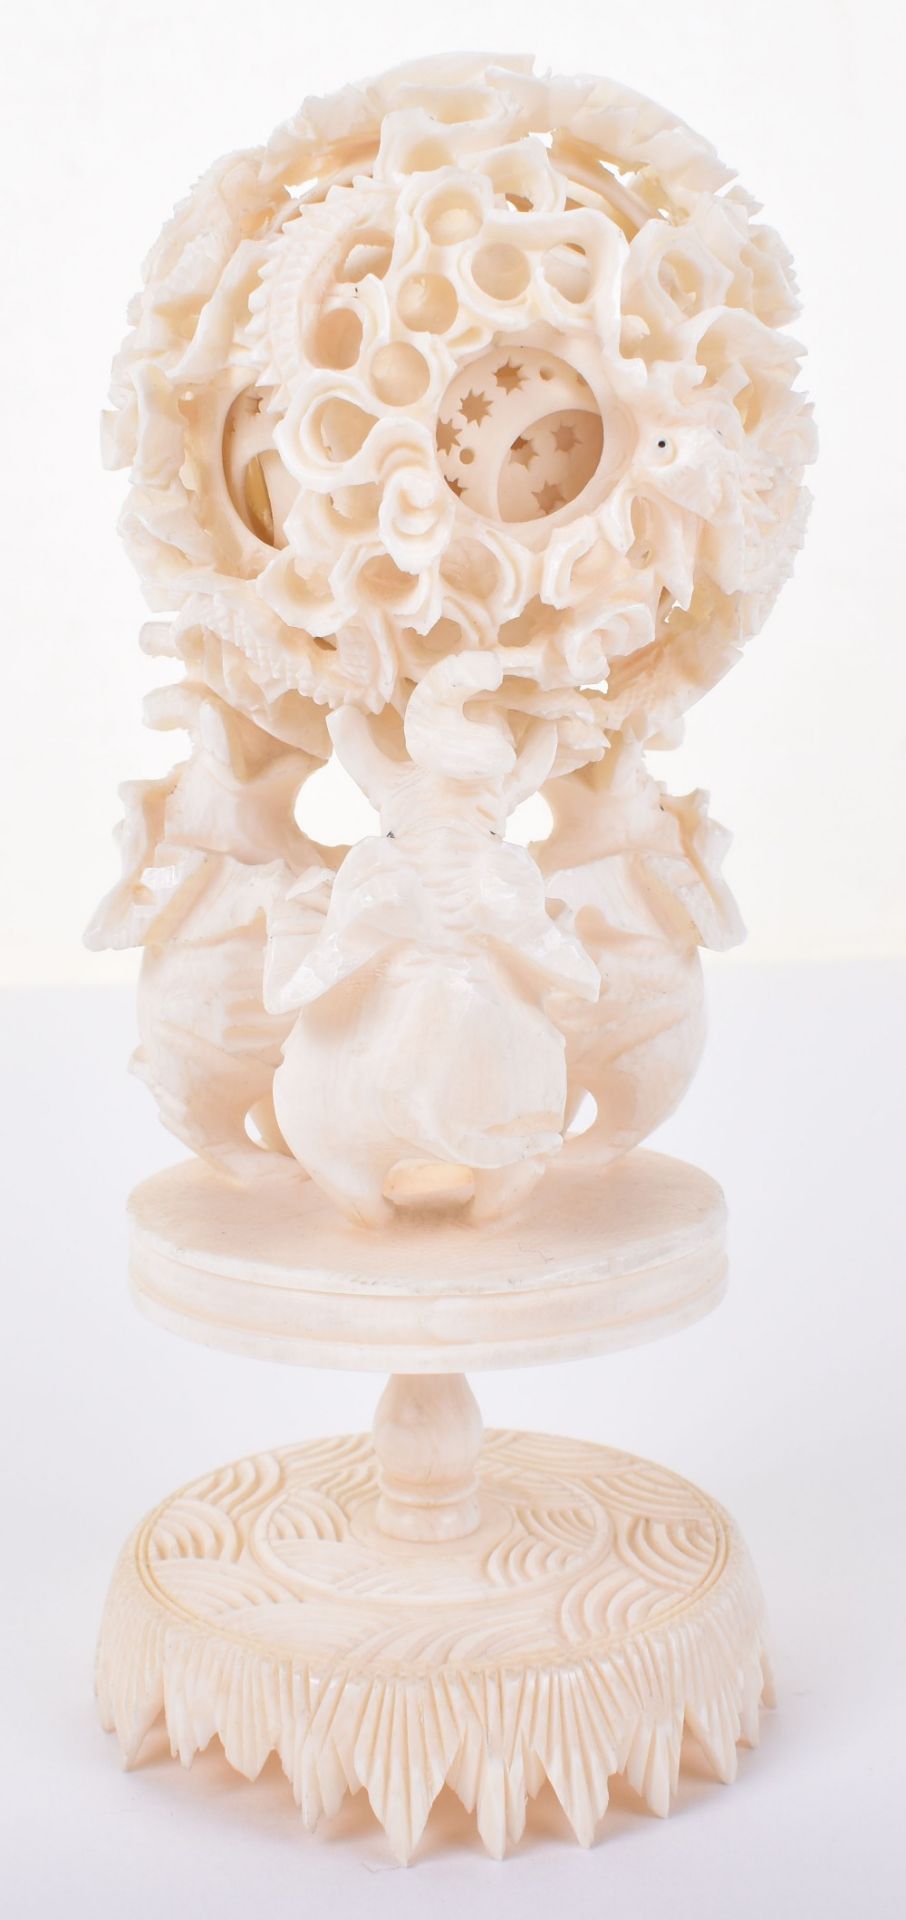 ^A 19th century Chinese Canton carved ivory puzzle ball - Image 3 of 9